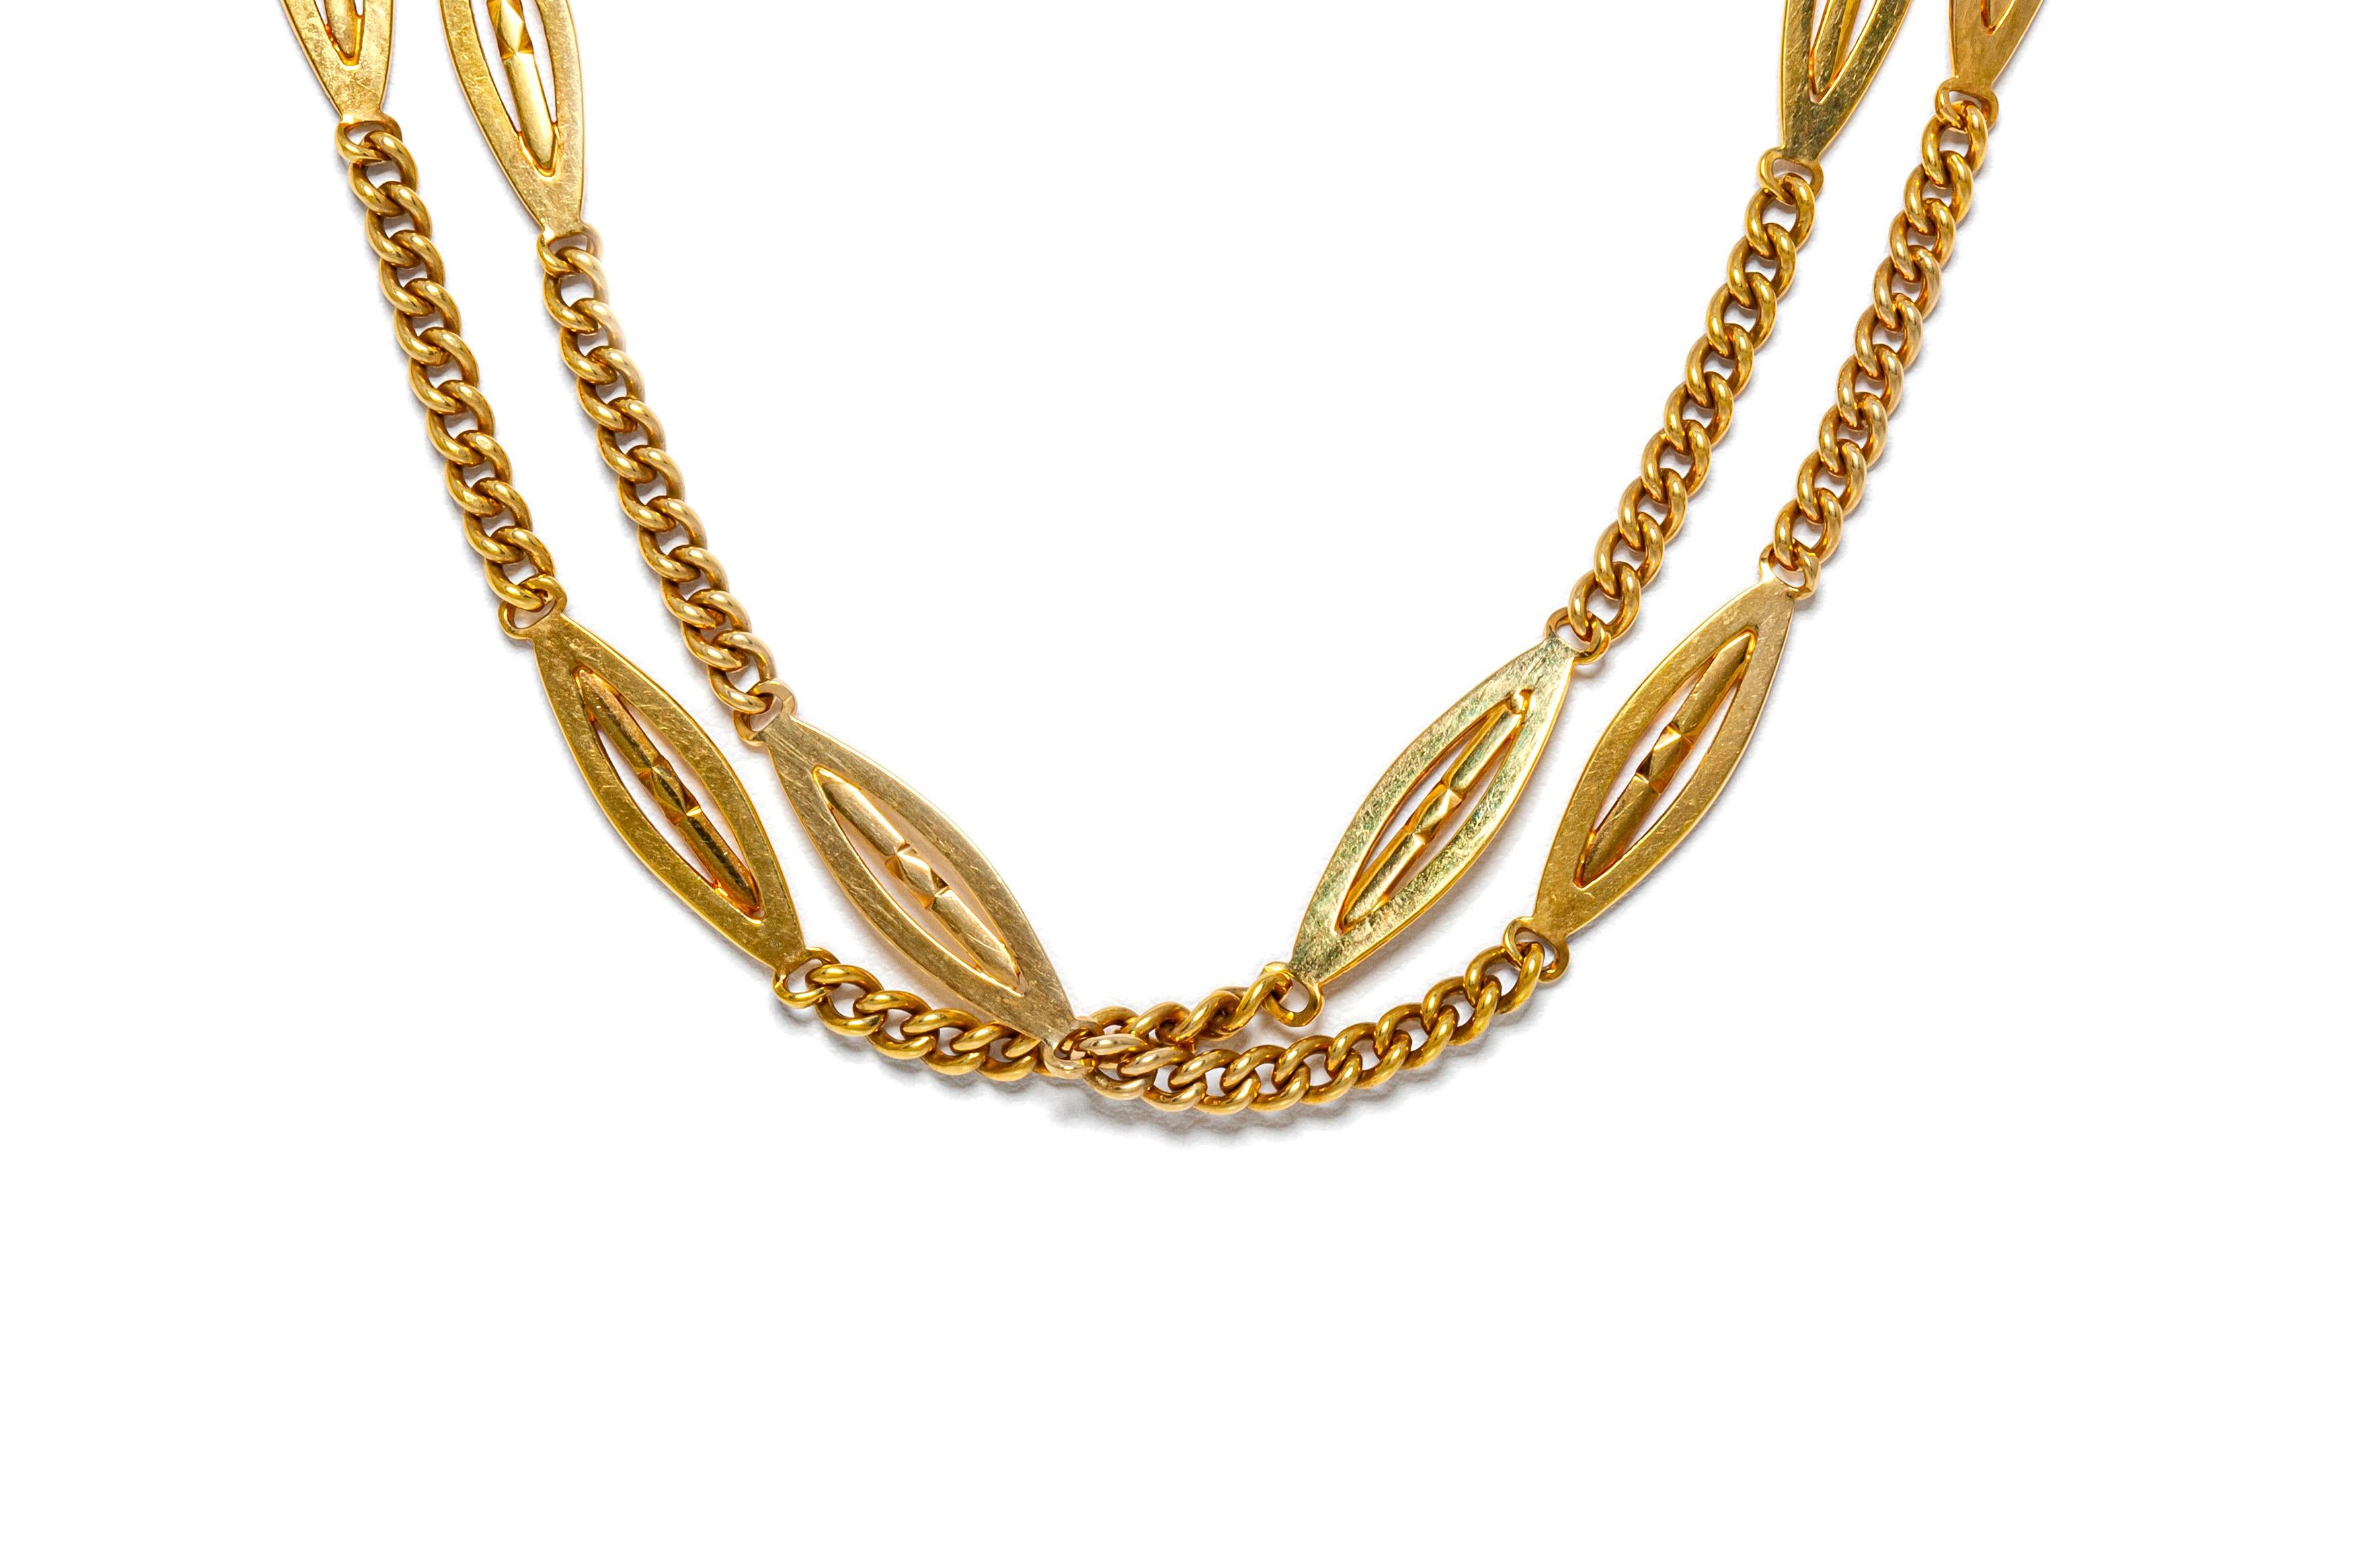 Chain, finely crafted in 14k yellow gold weighing 87.7 grams/56.4 dwt. The length of the chain is 74 inch/ 186 cm. Circa 1910's.